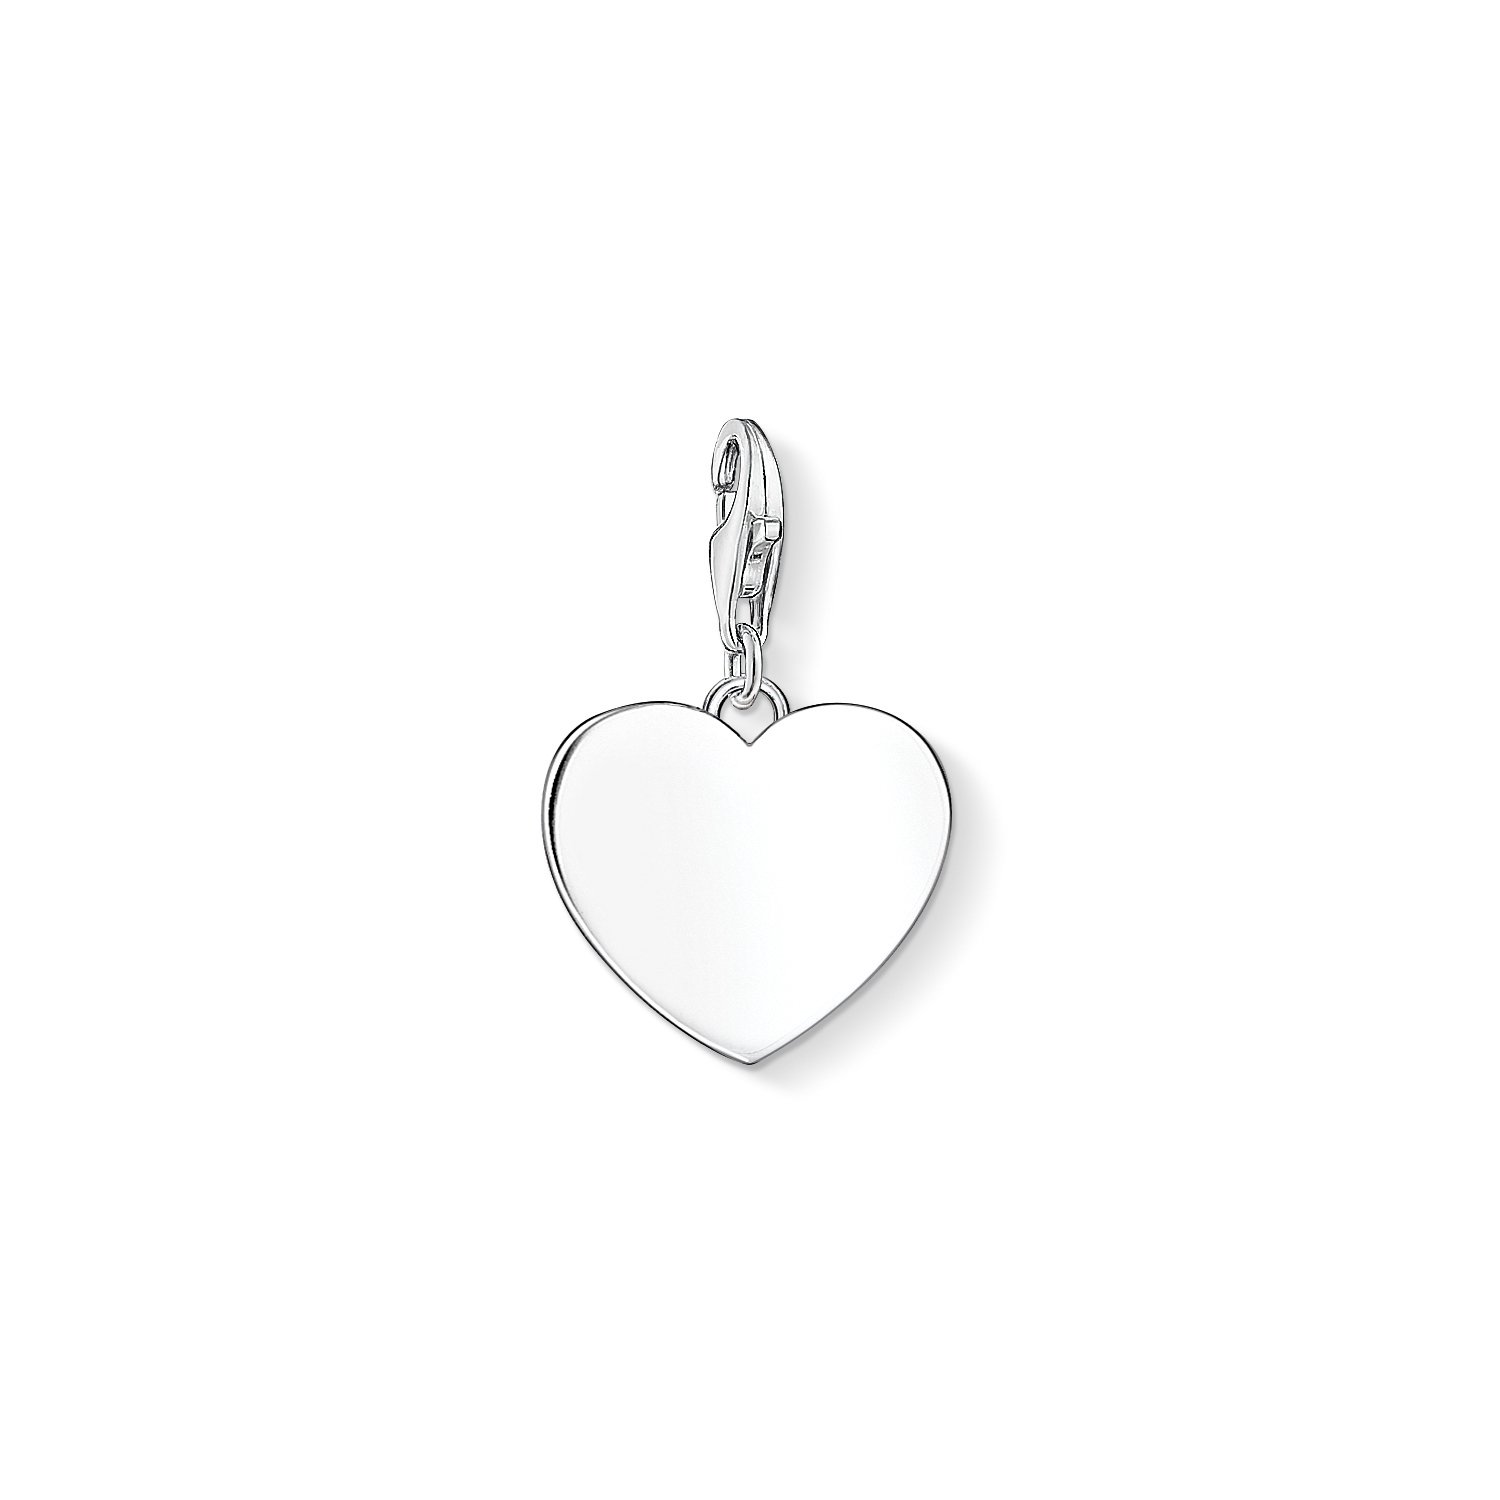 Thomas Sabo -Clasp Charms 925_Sterling_Silber 1634-001-21